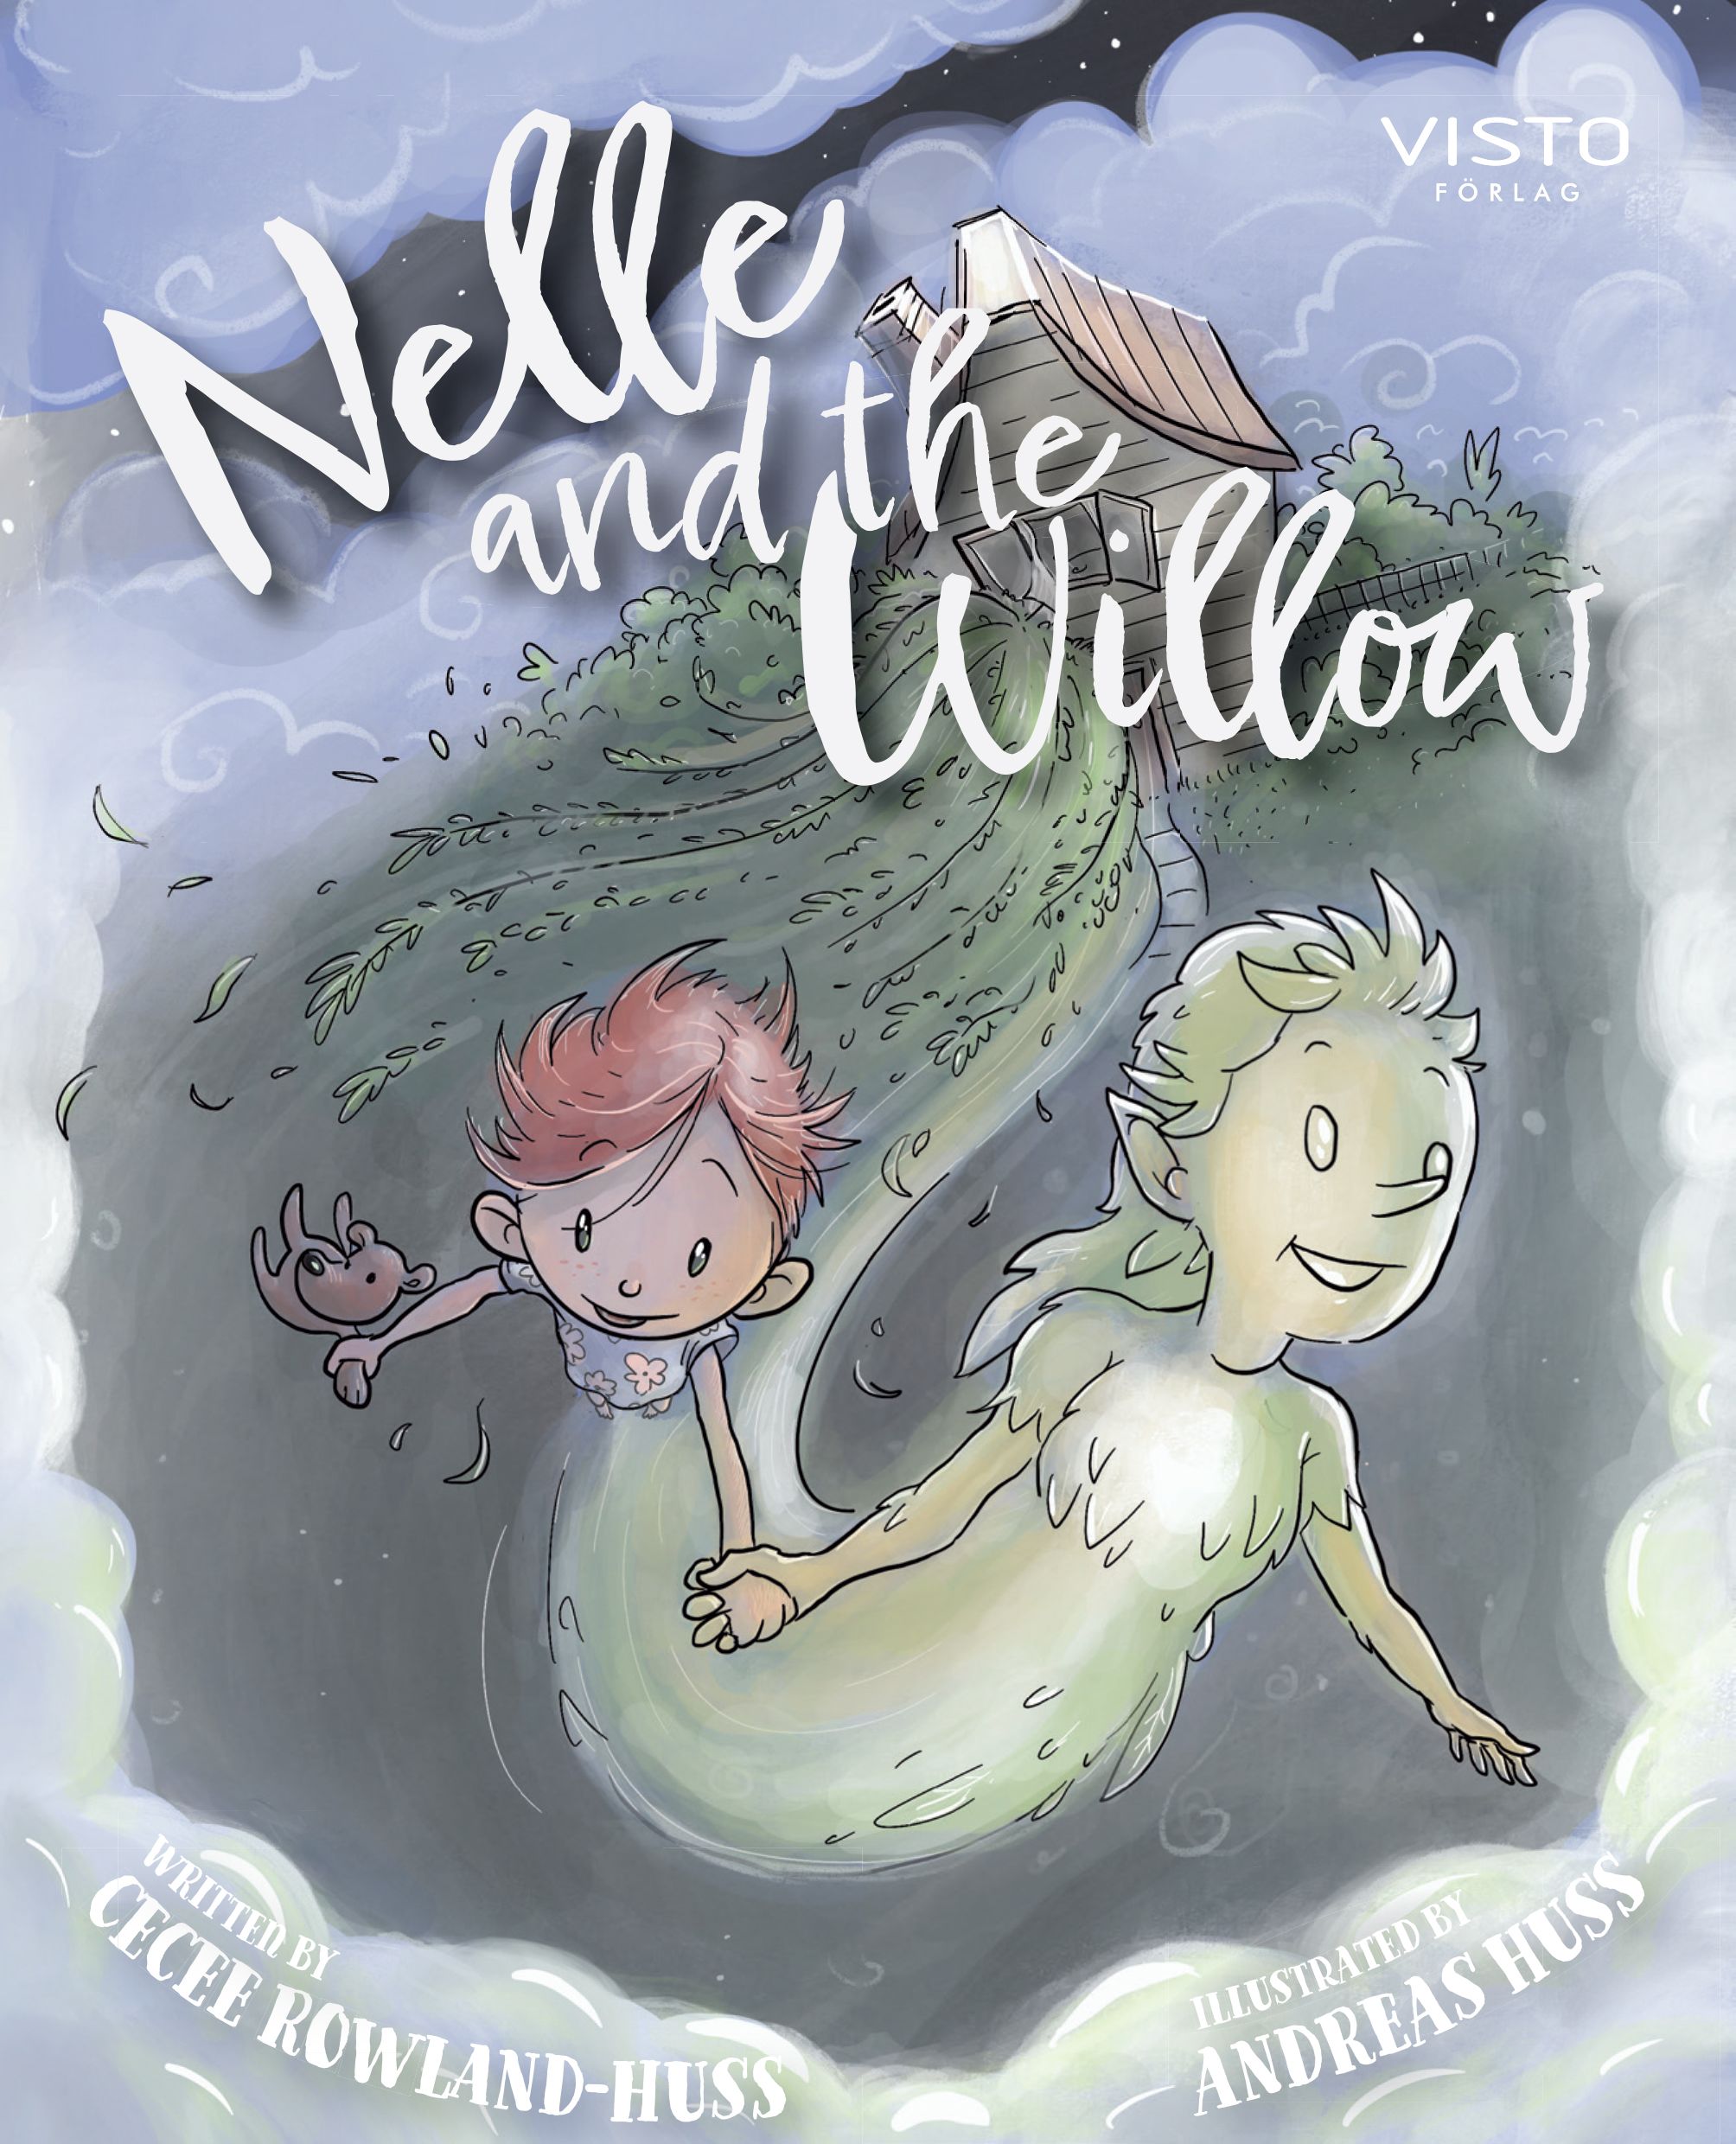 Nelle and the Willow, e-bog af Cecee Rowland-Huss